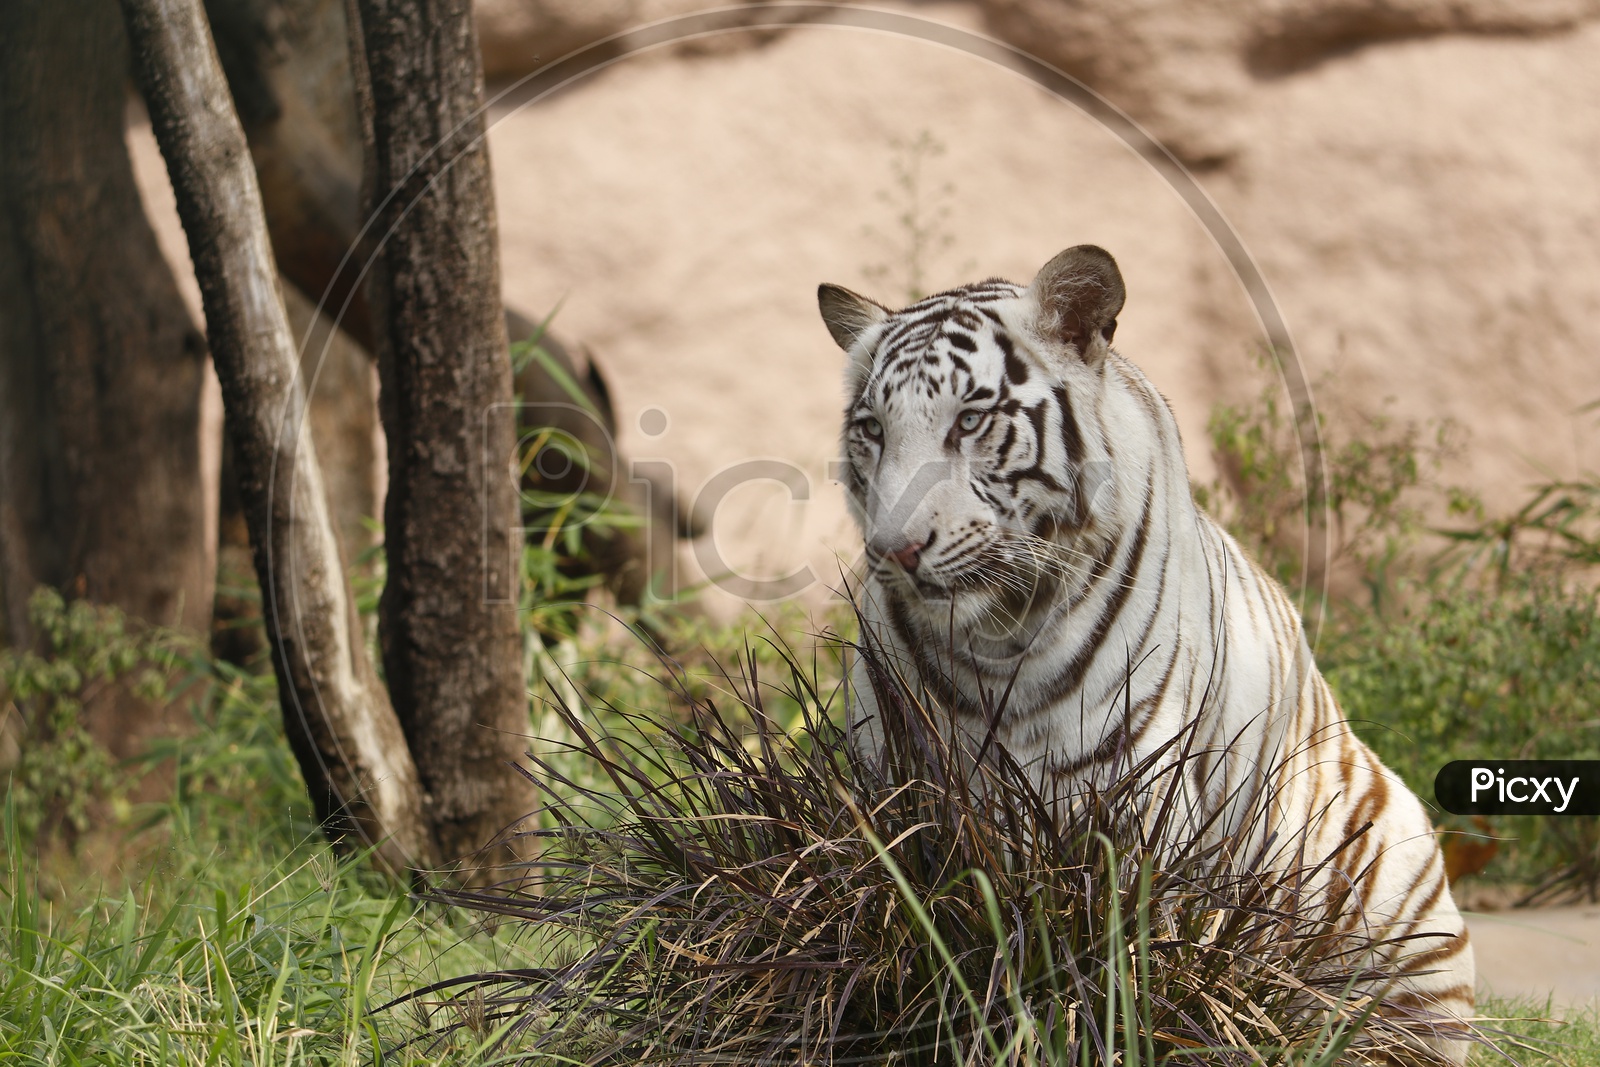 White Tiger in the zoo - Wild Animal